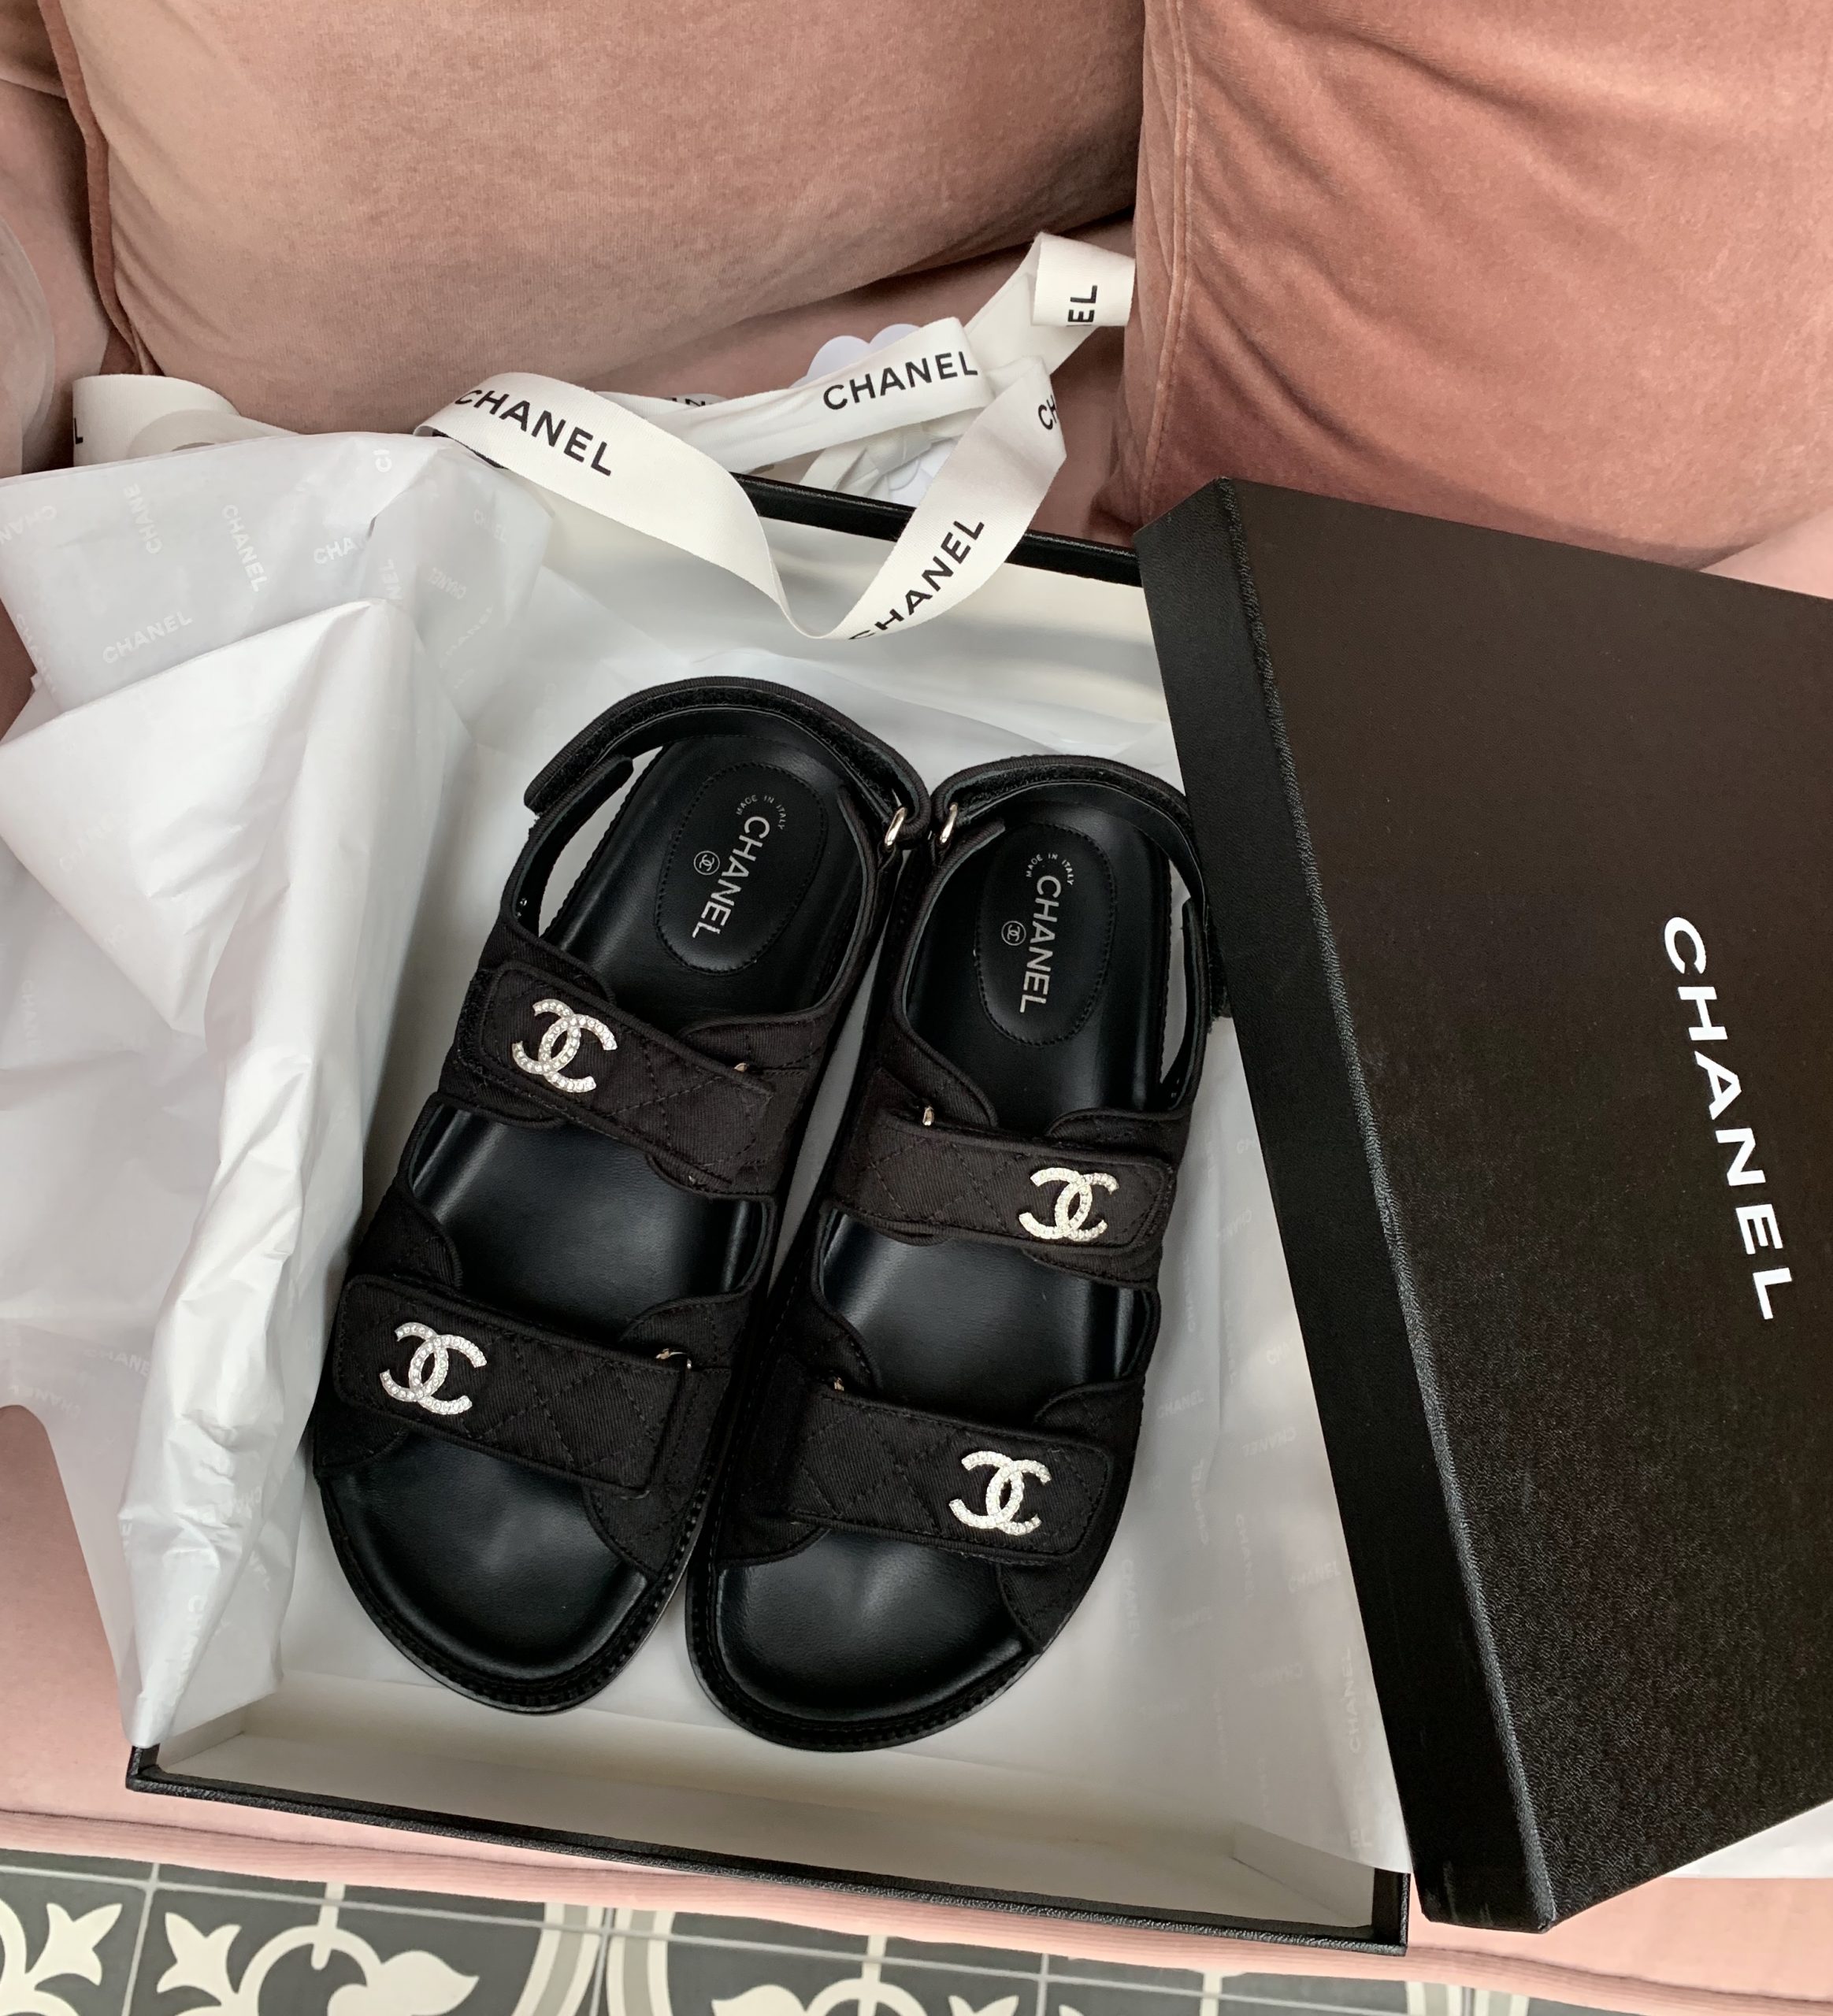 Chanel Sandals and how to Style 